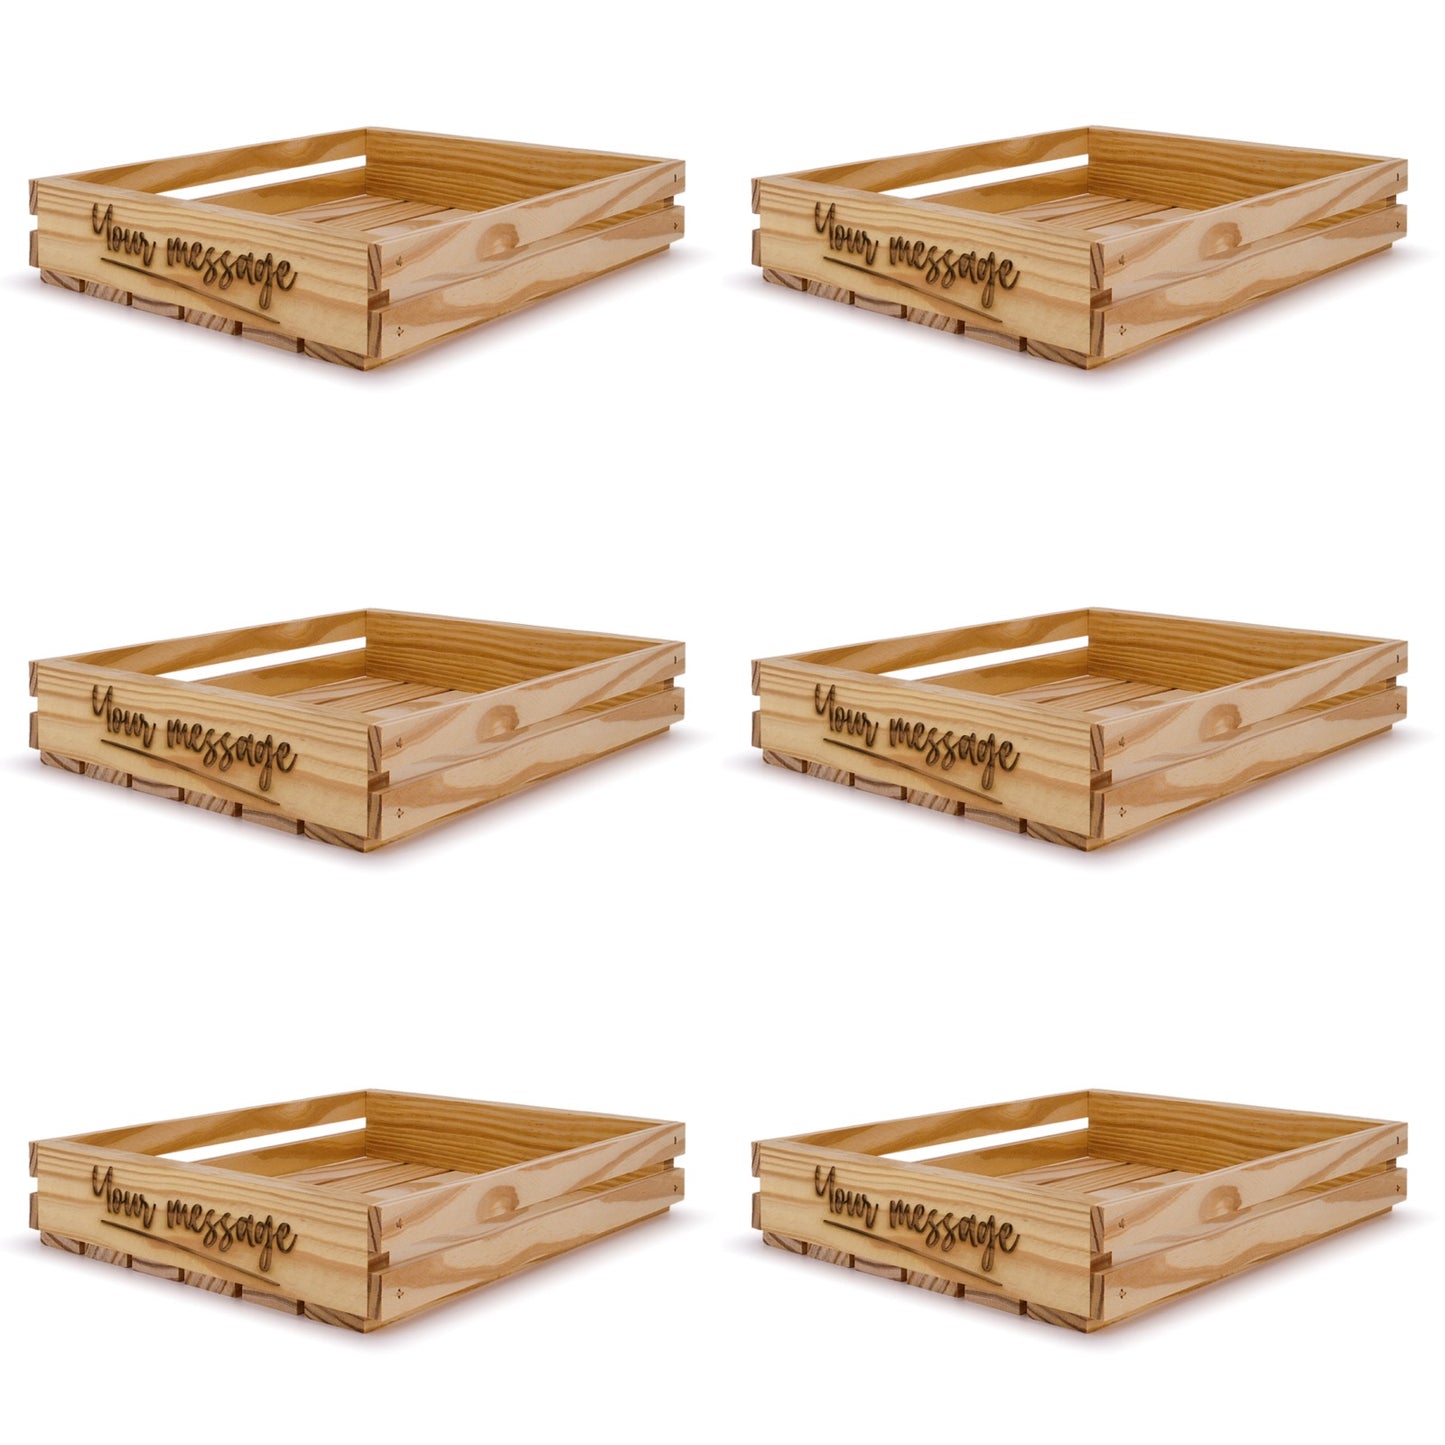 6 Small wooden crates 14x12x2.5 your message included